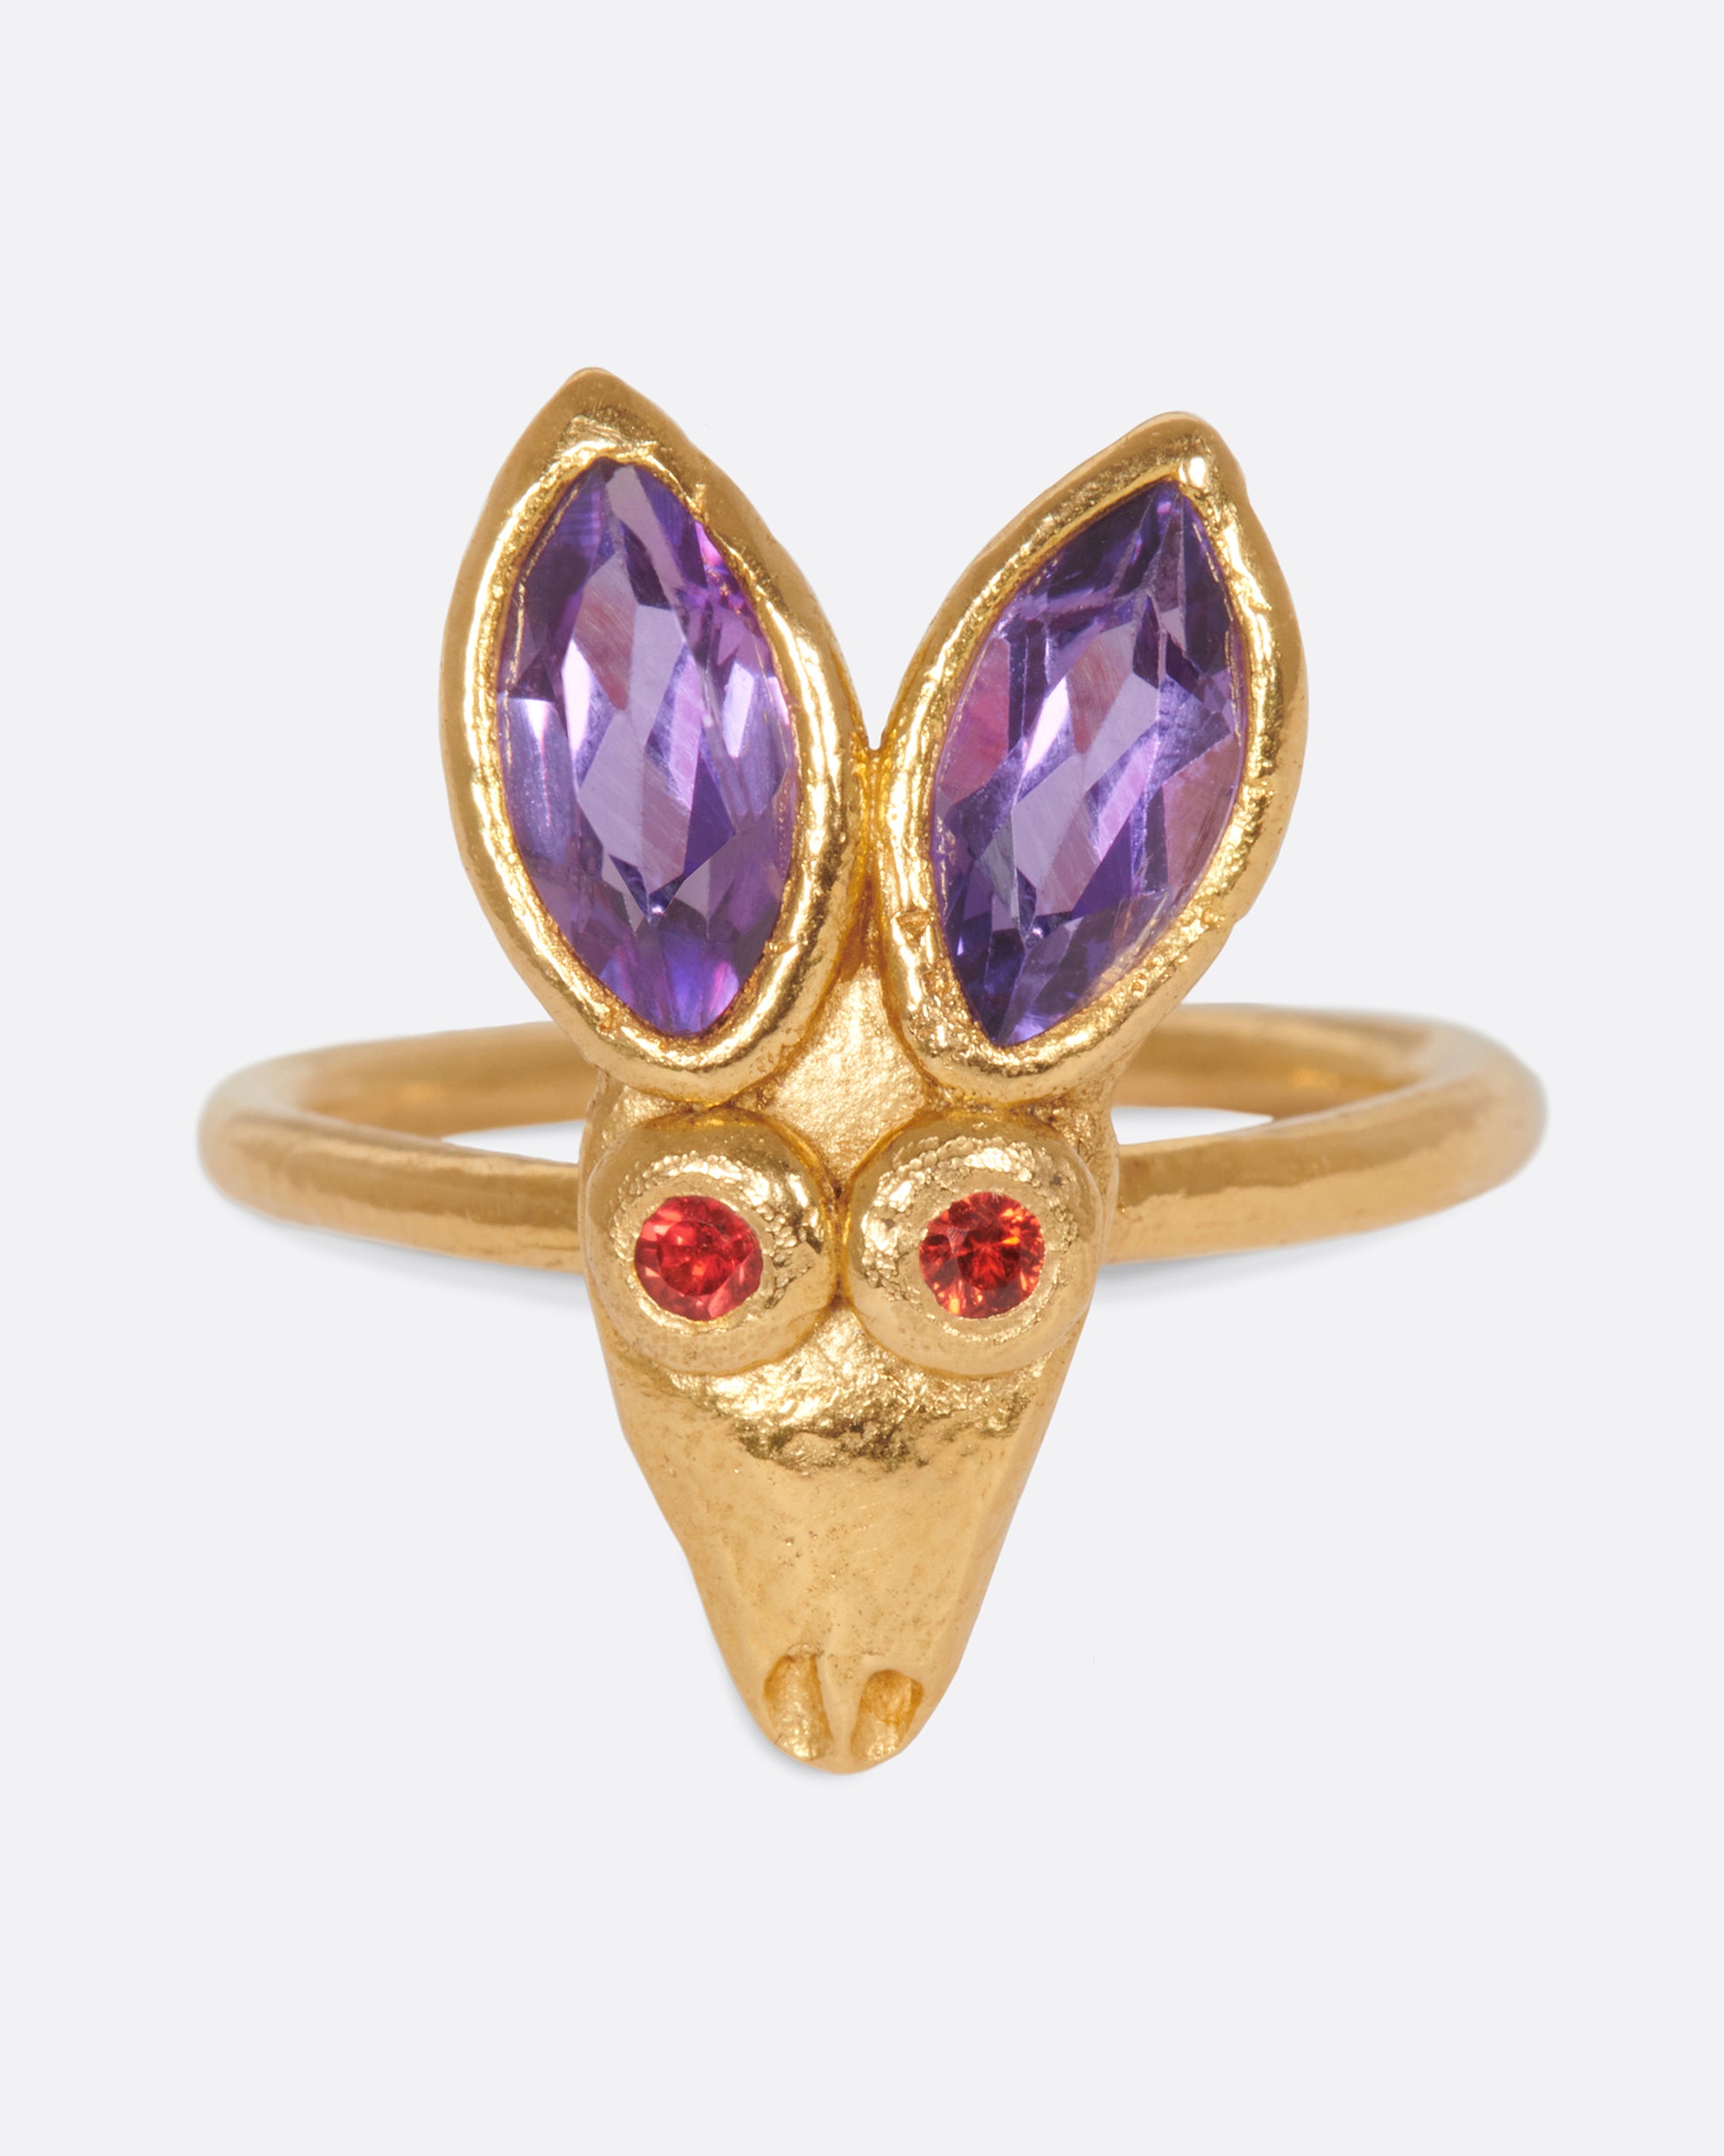 A little, hand-formed rabbit ring with big amethyst ears and red sapphire eyes.